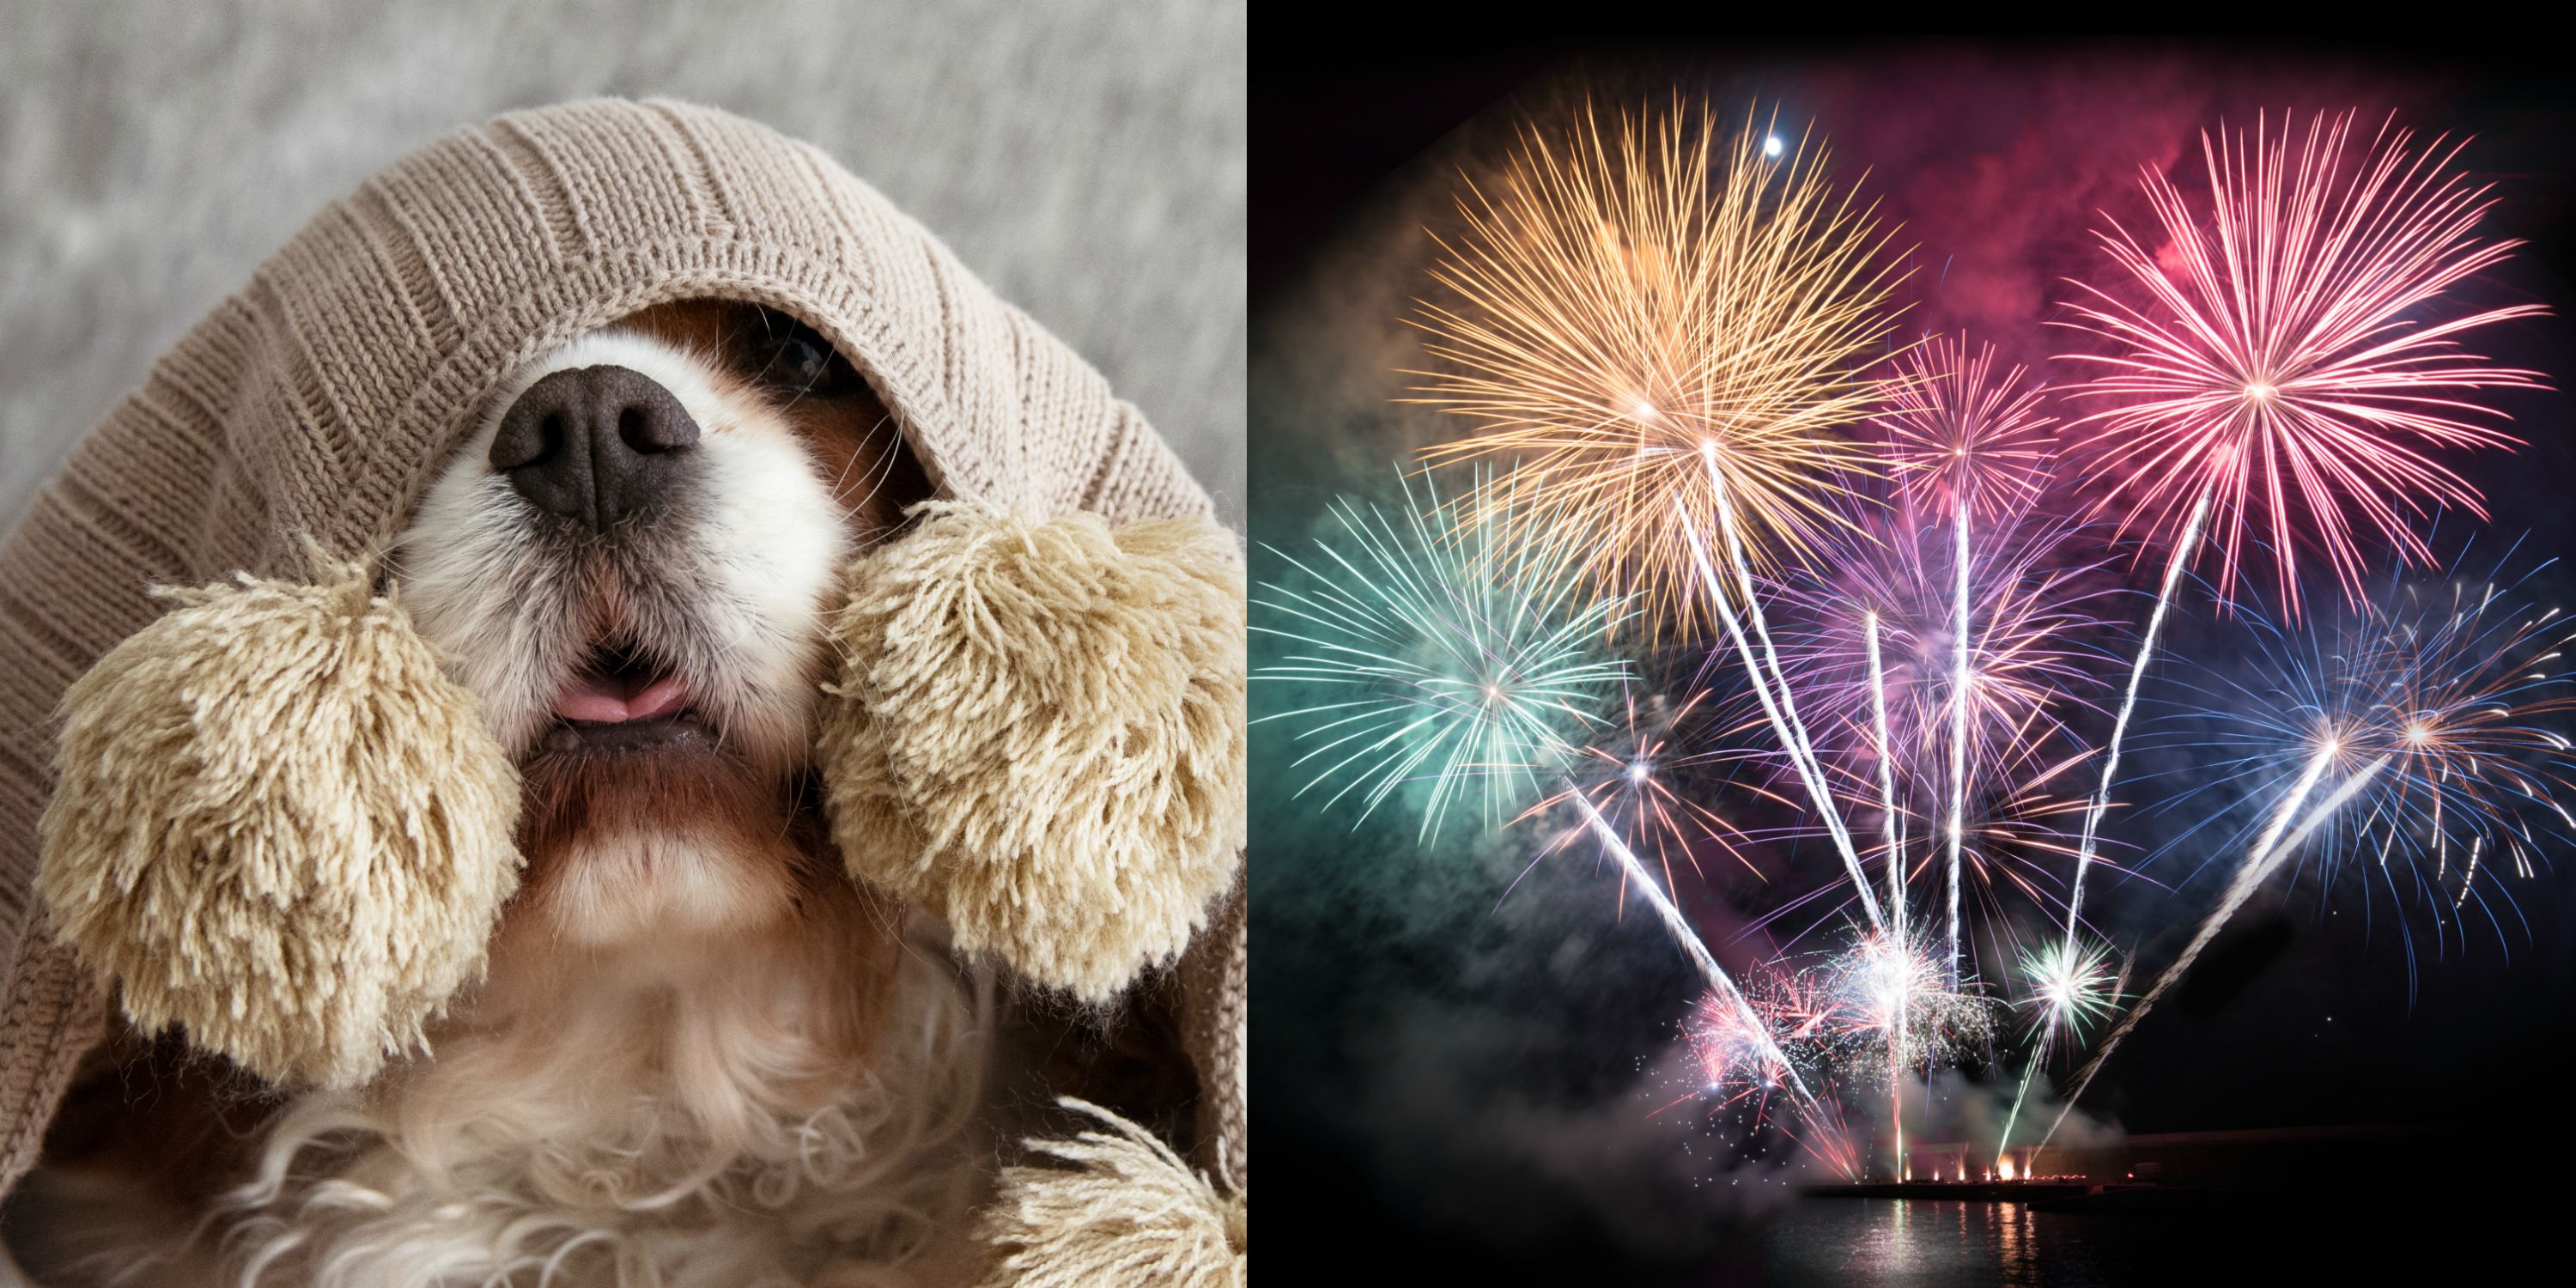 why do dogs hate fireworks